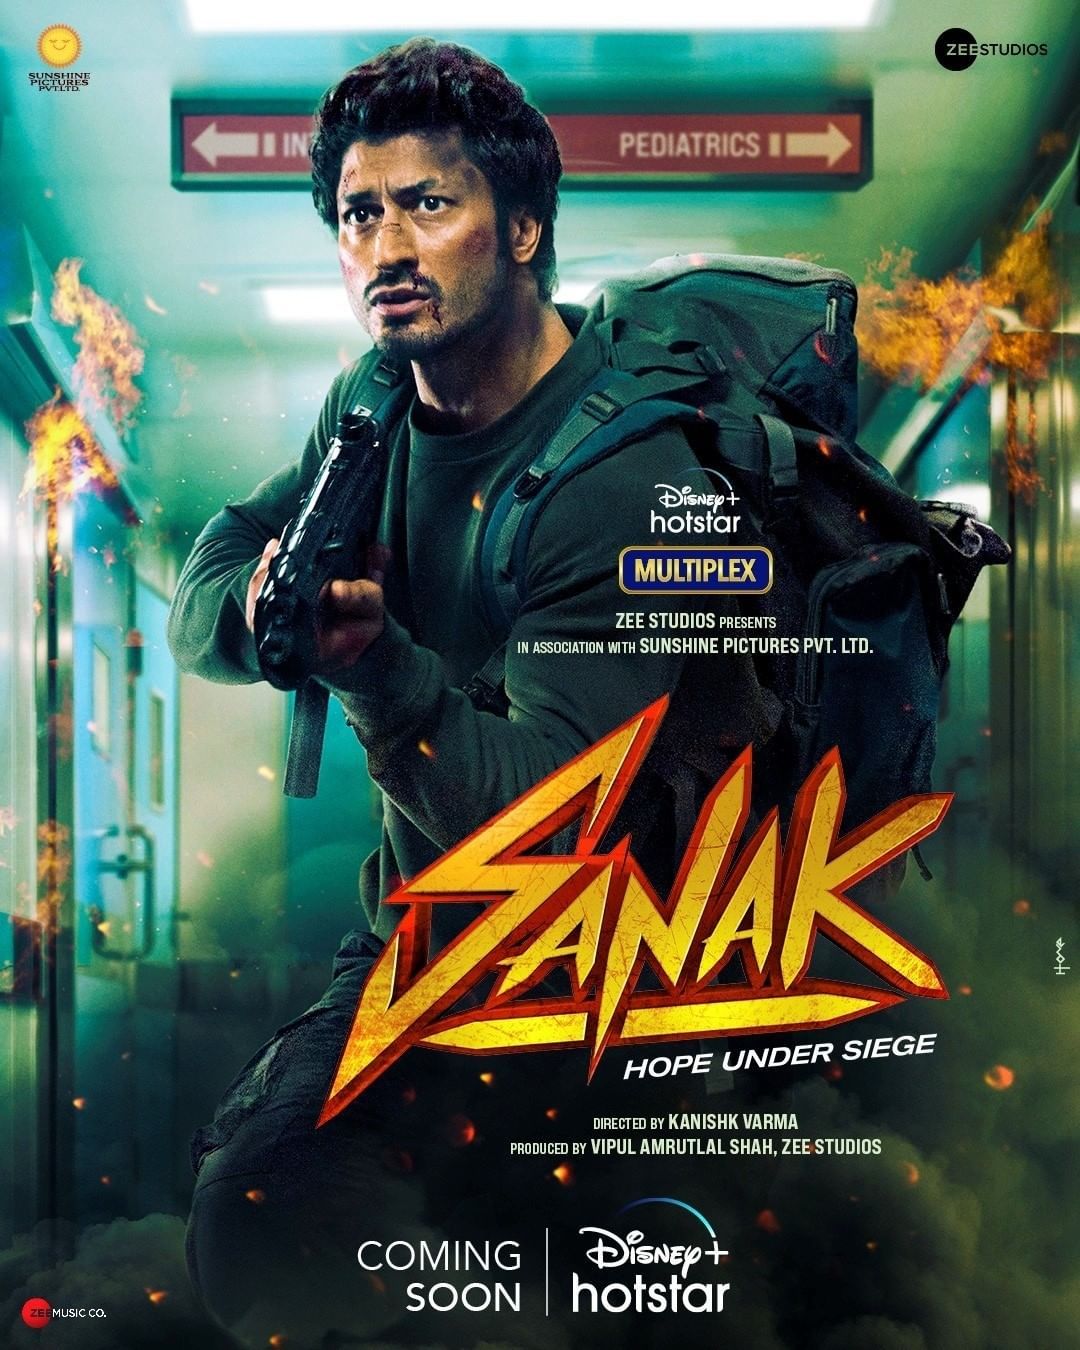 Vidyut Jammwal starrer Sanak – Hope Under Siege to take the digital route; check out the new poster